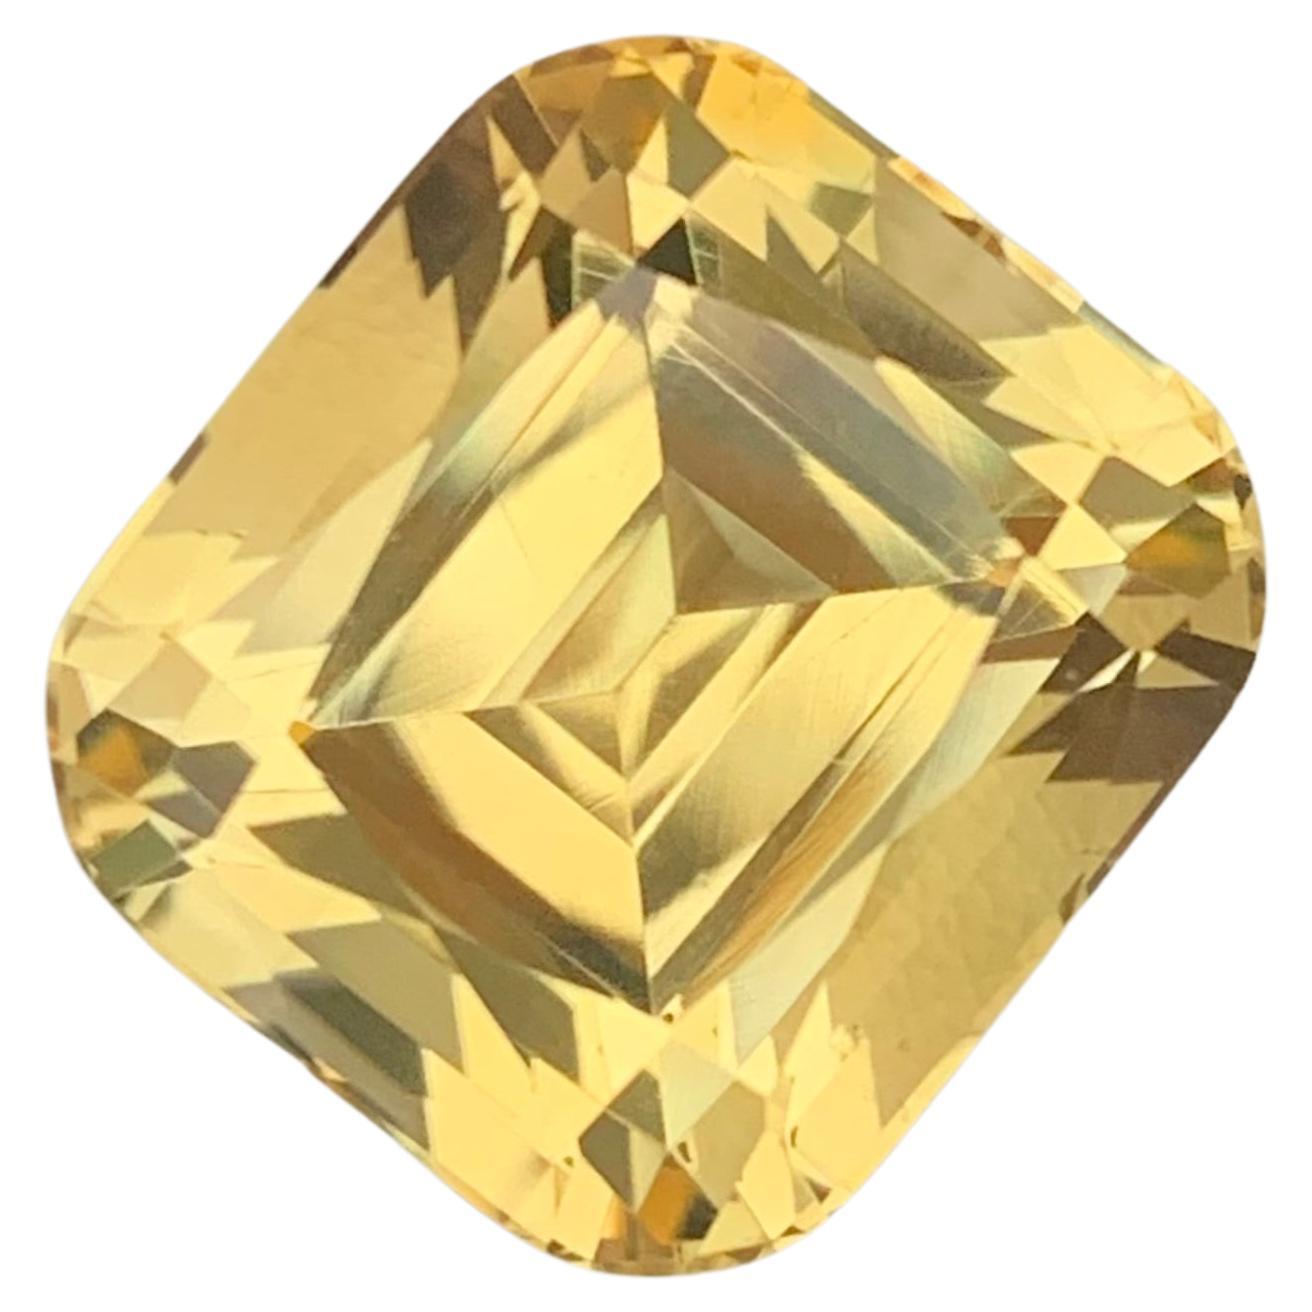 18.70 Carat Natural Loose Yellow Citrine Gemstone From Brazil Mine Cushion Cut For Sale